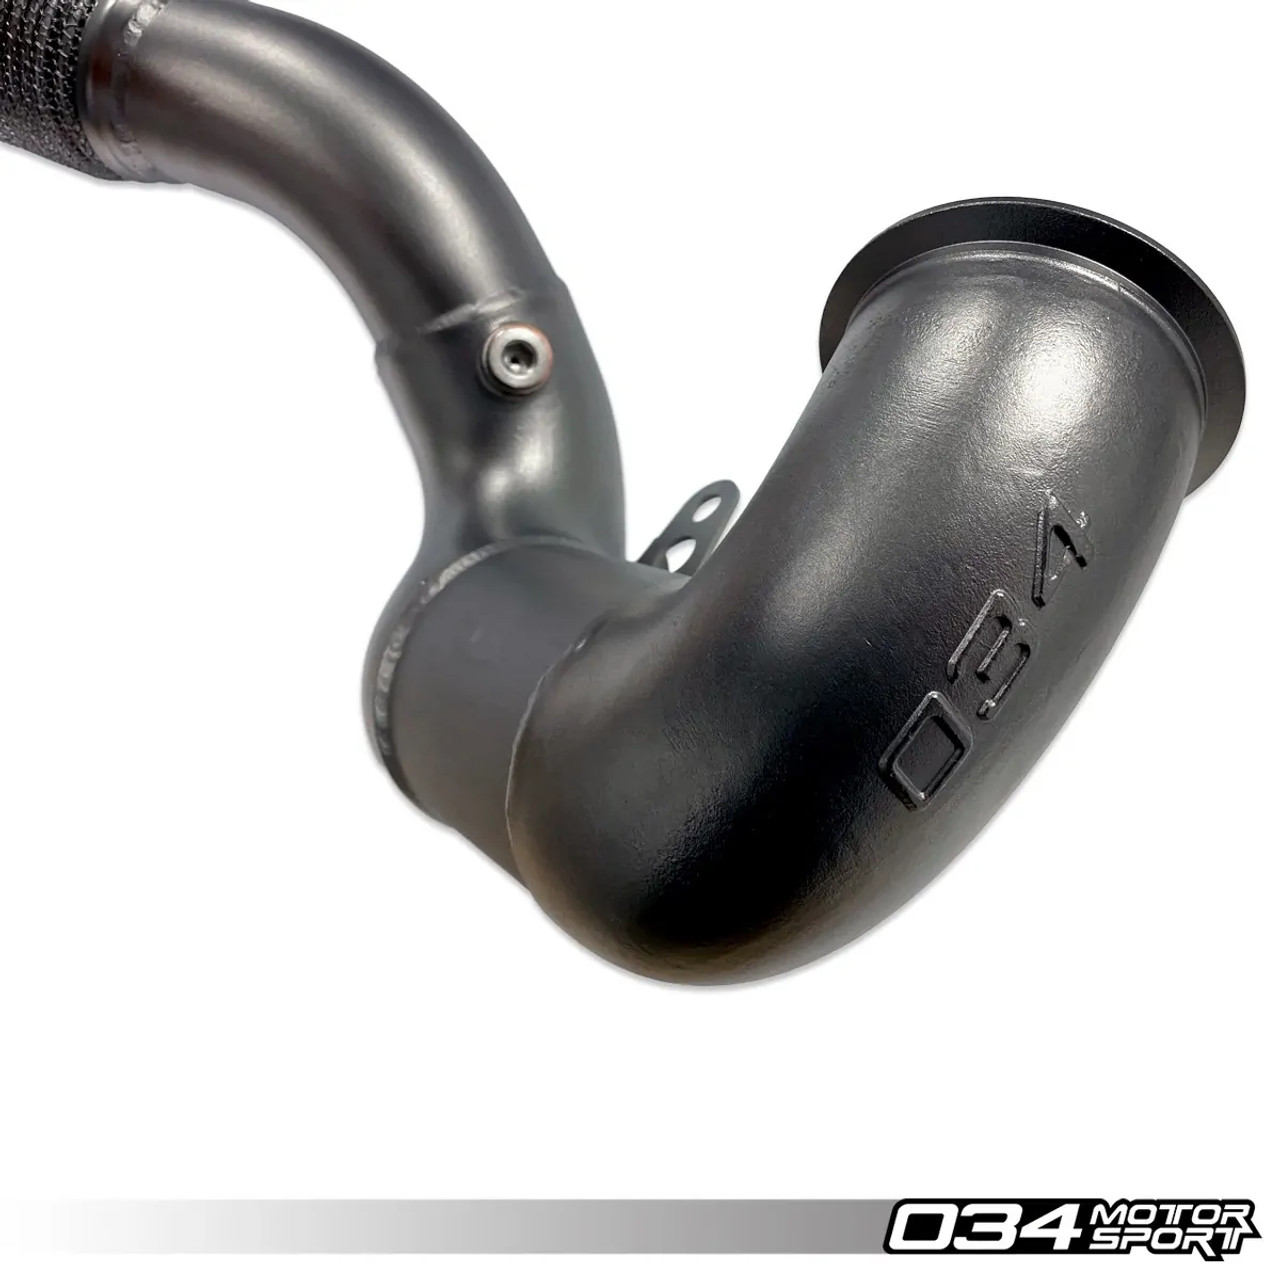 034Motorsport Cast Stainless Steel Racing Downpipe for MK7 & 8V AWD